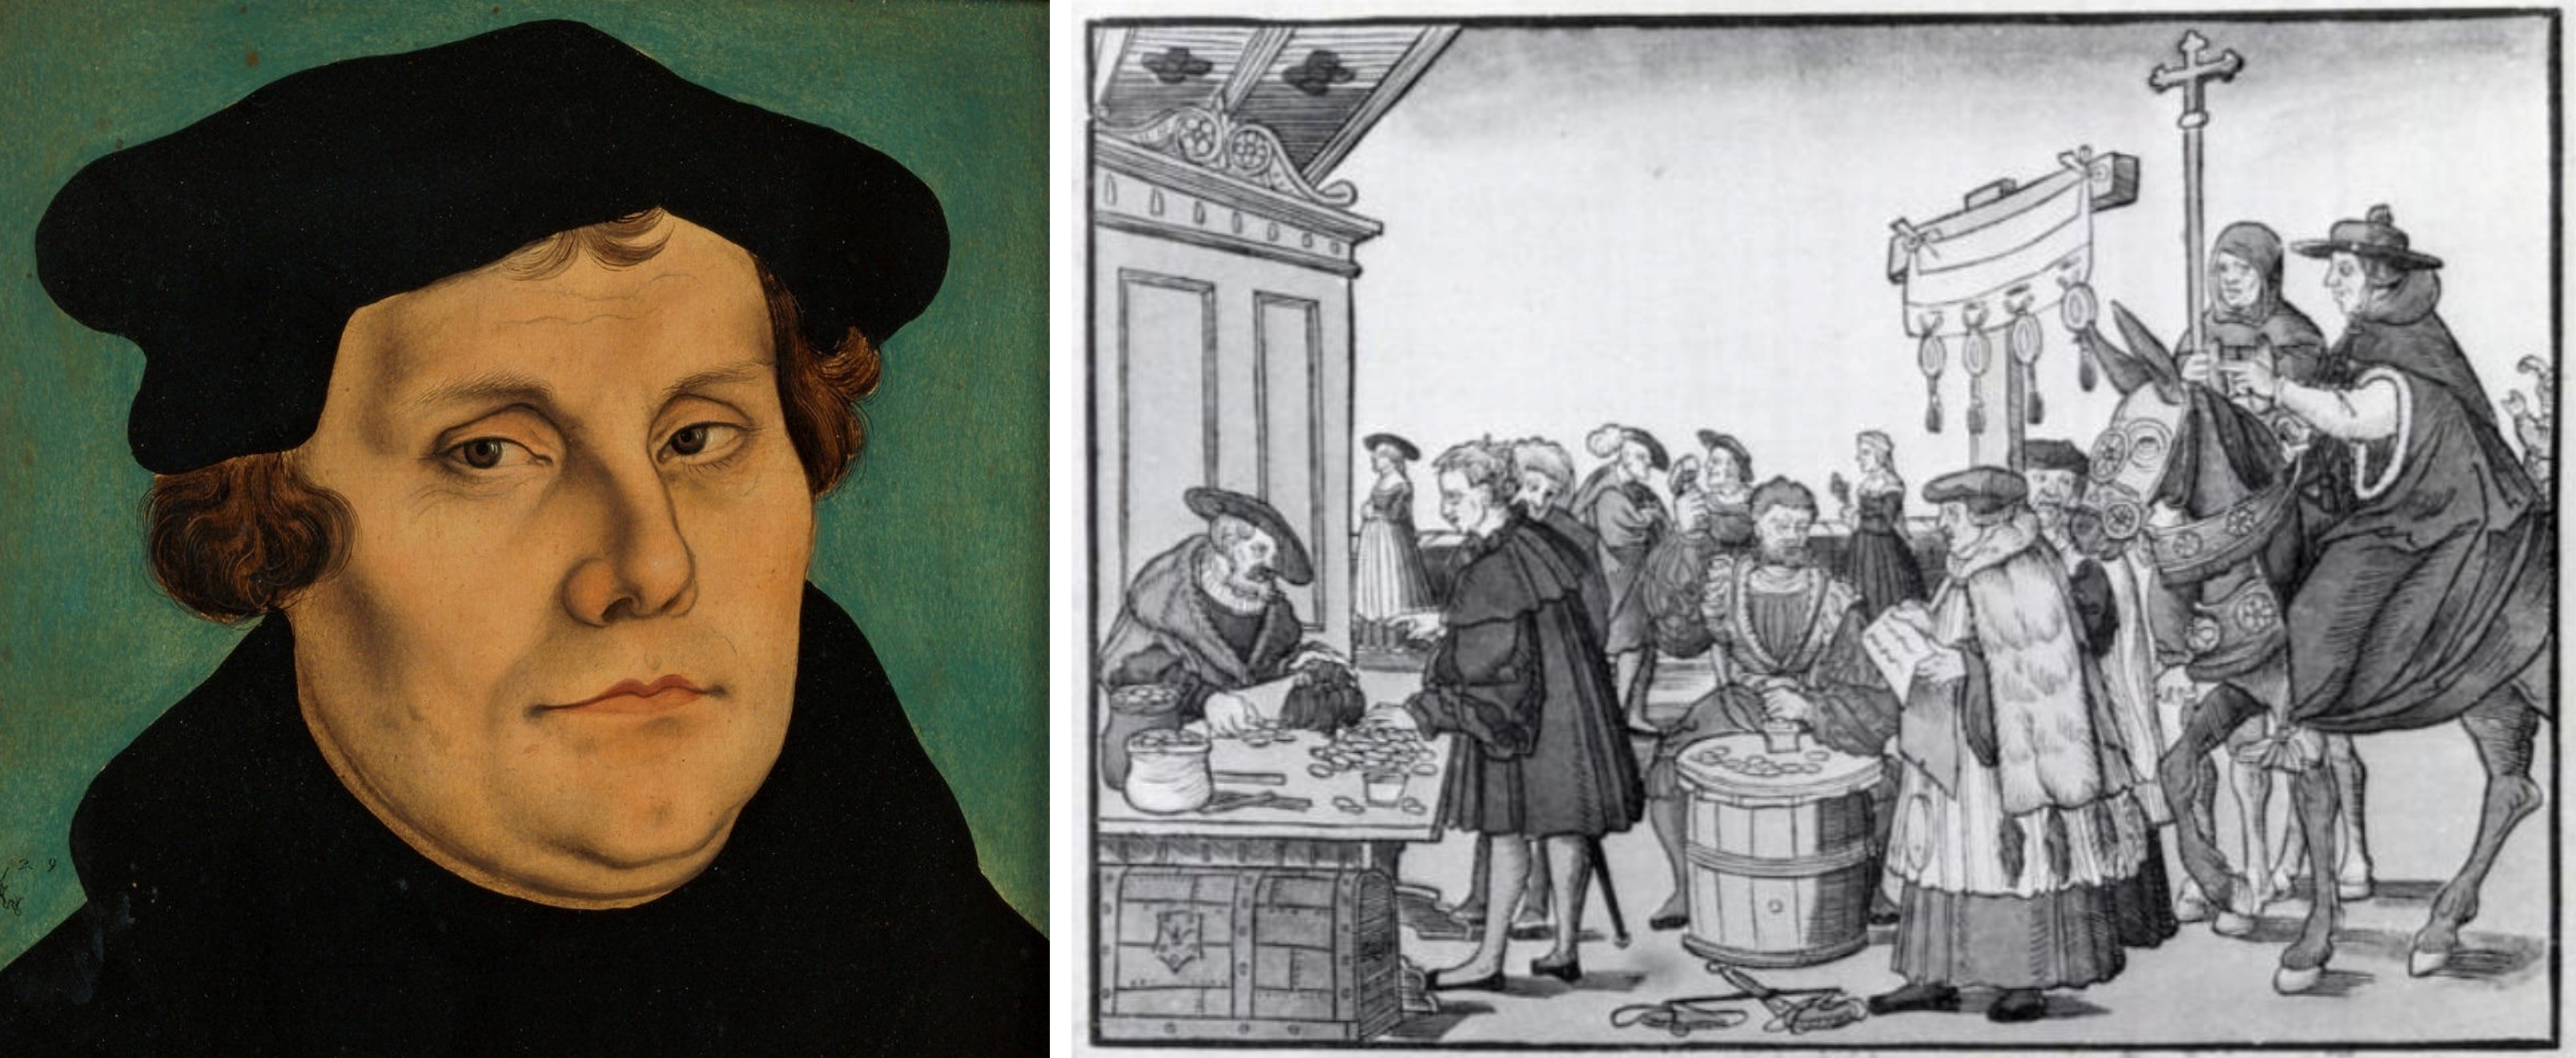 On the left, portrait of Martin Luther. On the right, a depiction of the sale of indulgences.